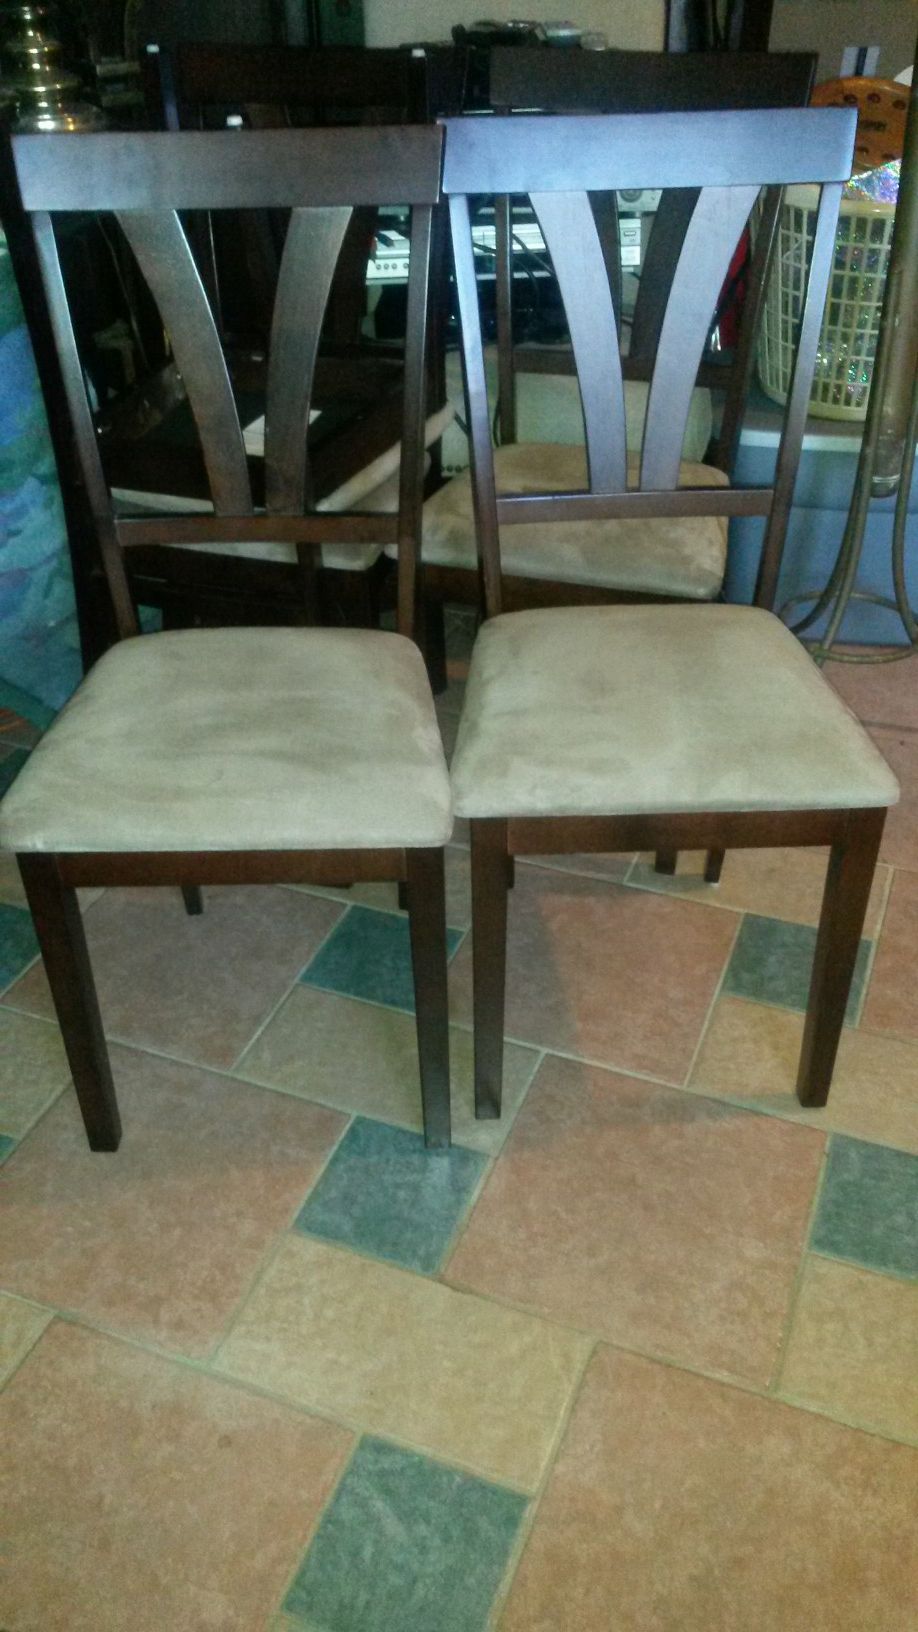 5 new beautiful solid cherry wood chairs